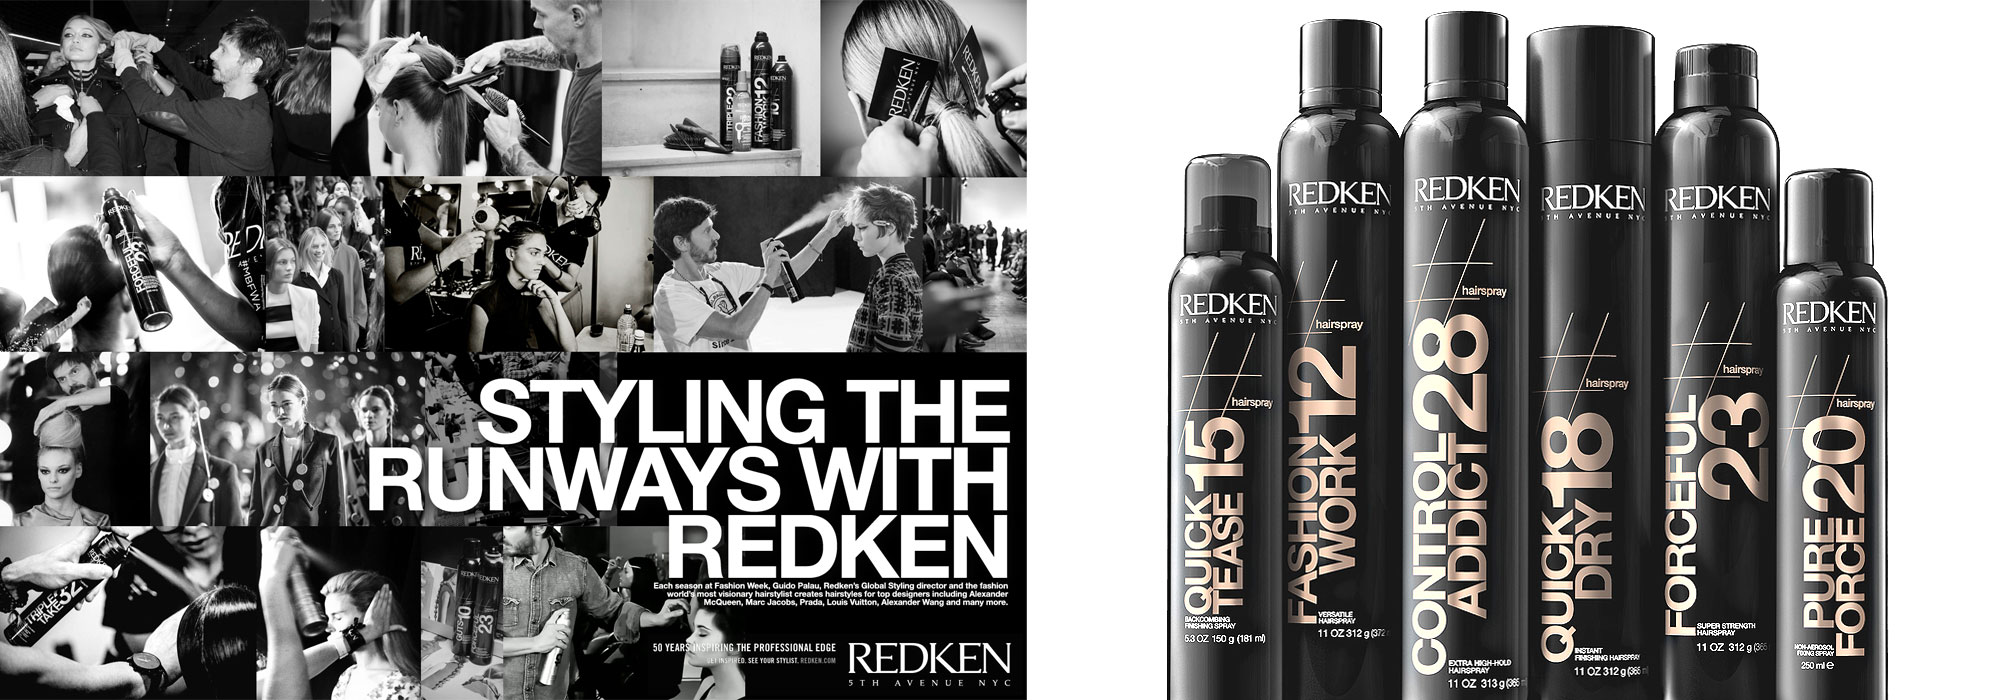 Redken branding and packaging designed by MPAKT